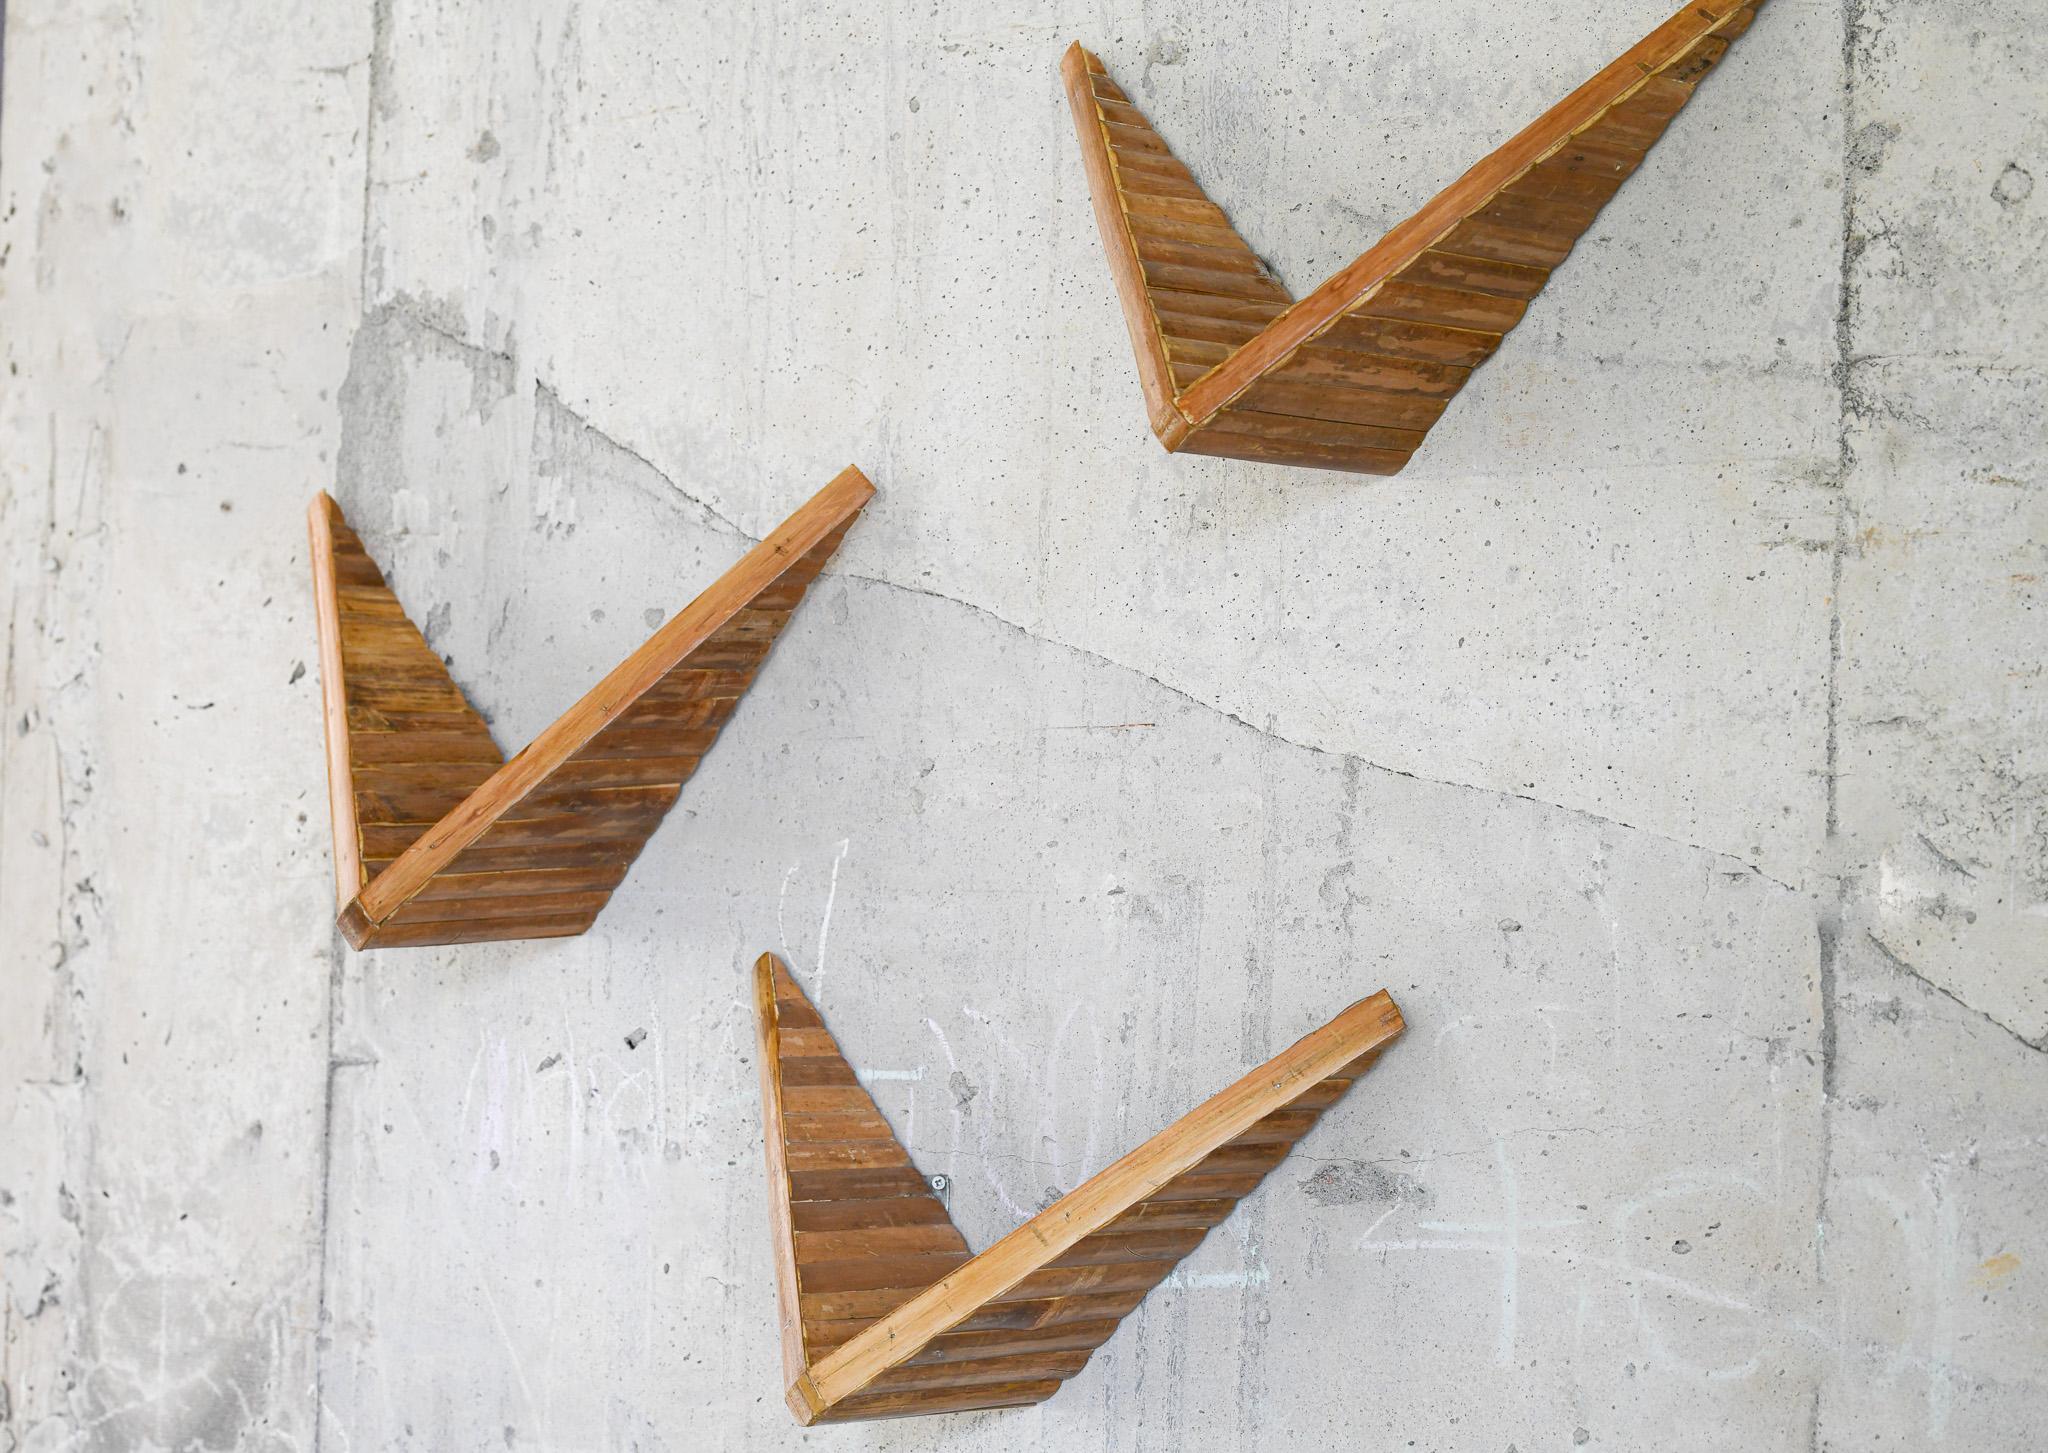 These V Shape Bamboo Shelves offer a unique storage solution for any space. Crafted with simple, yet elegant pieces of bamboo, these pieces are handcrafted to form an intricate V-shape. Sold in sets of three, these shelves make a beautiful addition